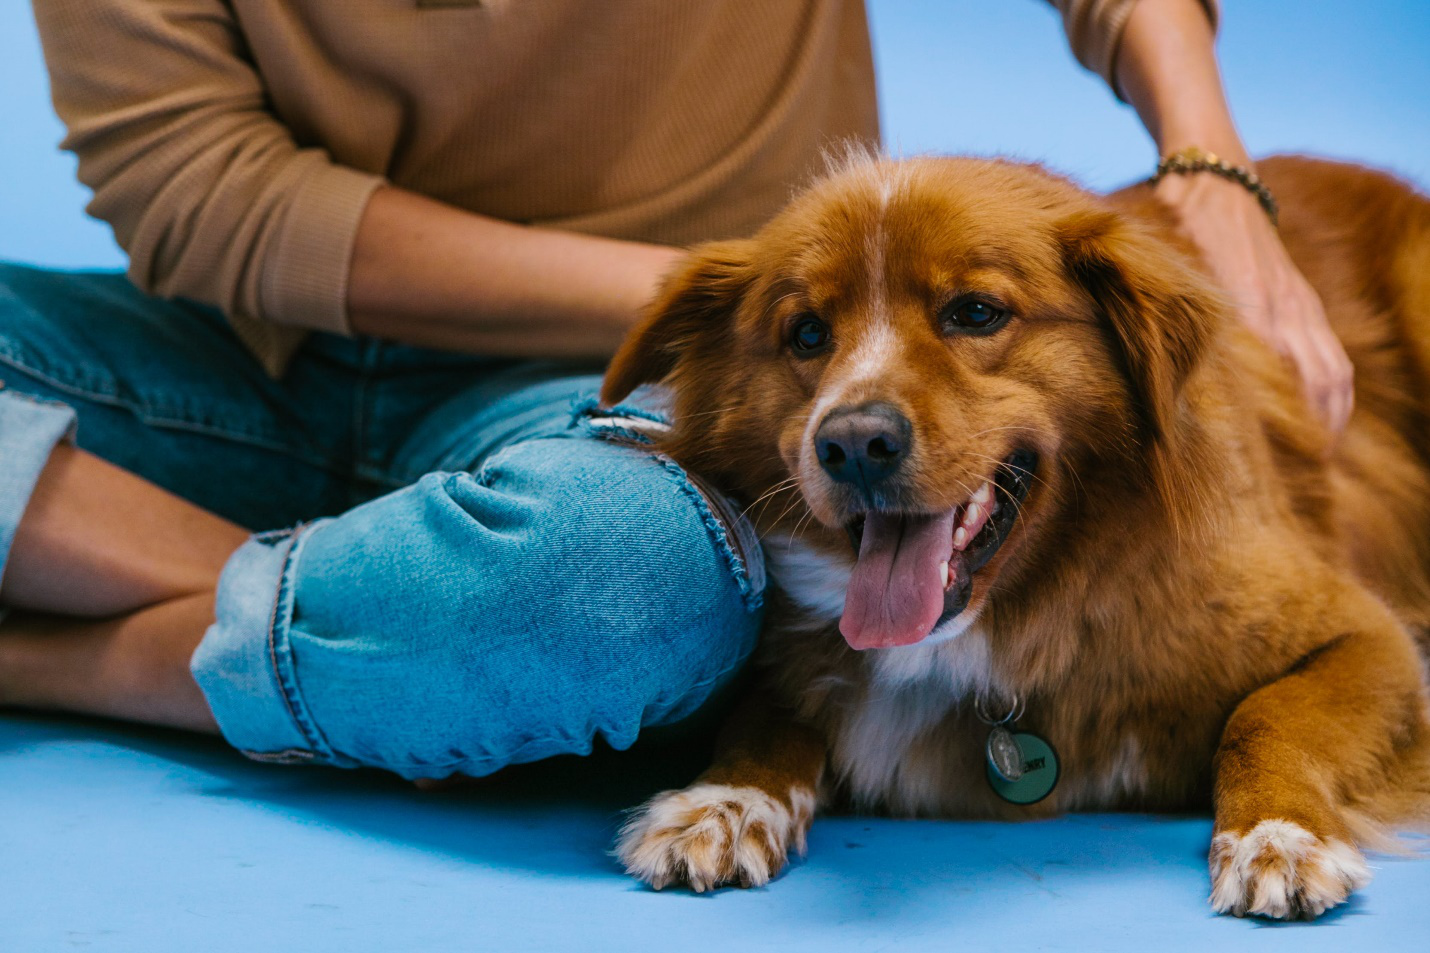 A fluffy brown dog enjoys cuddles with a person in a brown top and blue jeans on a blue floor at a dog boarding facility.